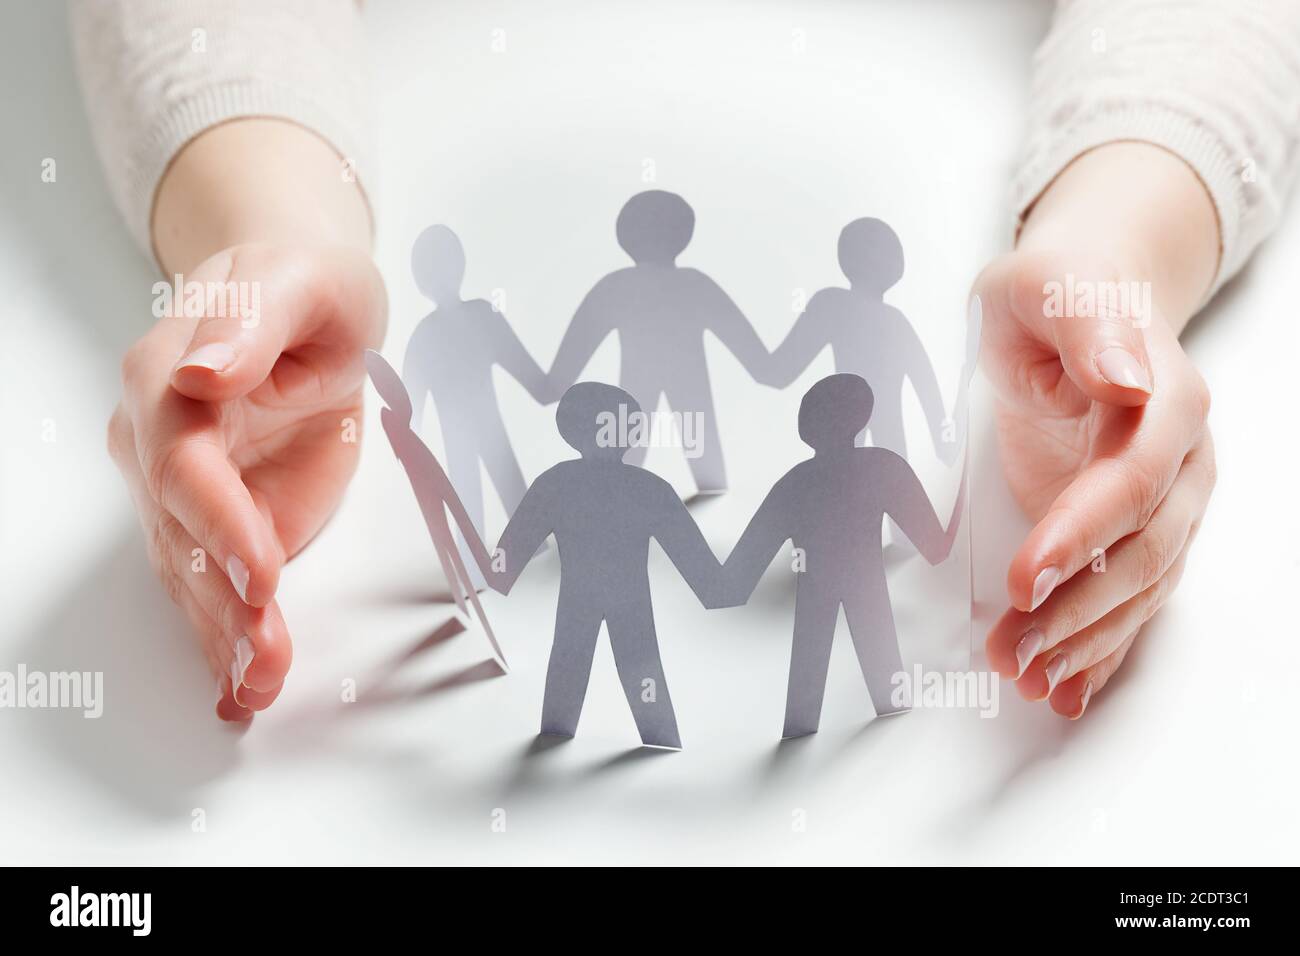 Paper people surrounded by hands in gesture of protection. Concept of insurance Stock Photo